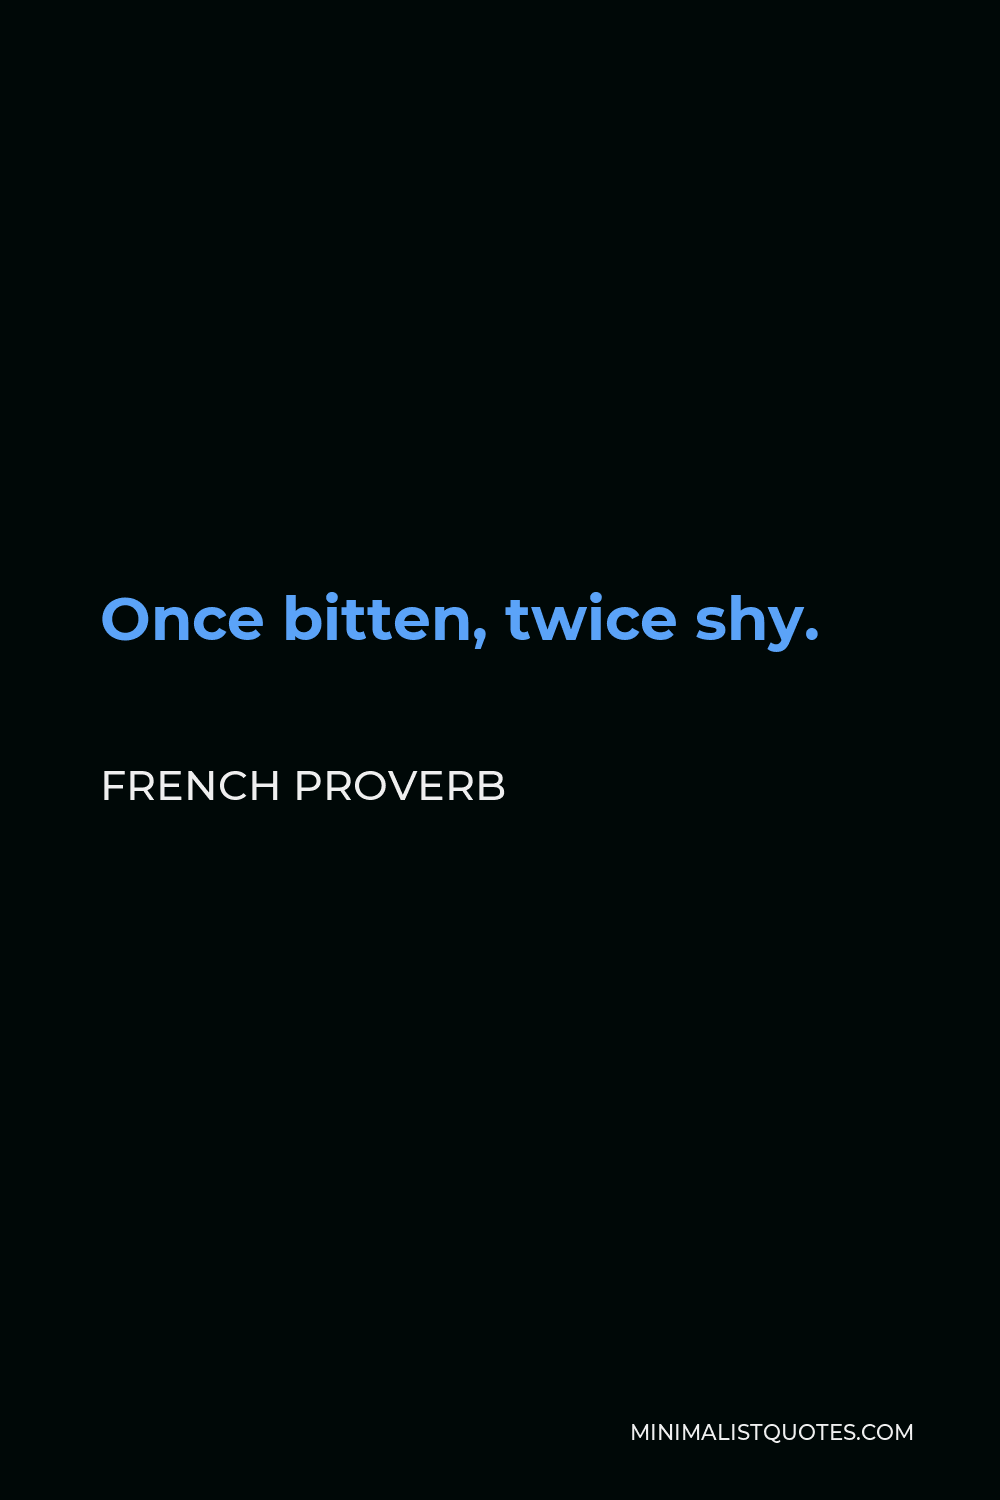 French Proverb Quote - Once bitten, twice shy.